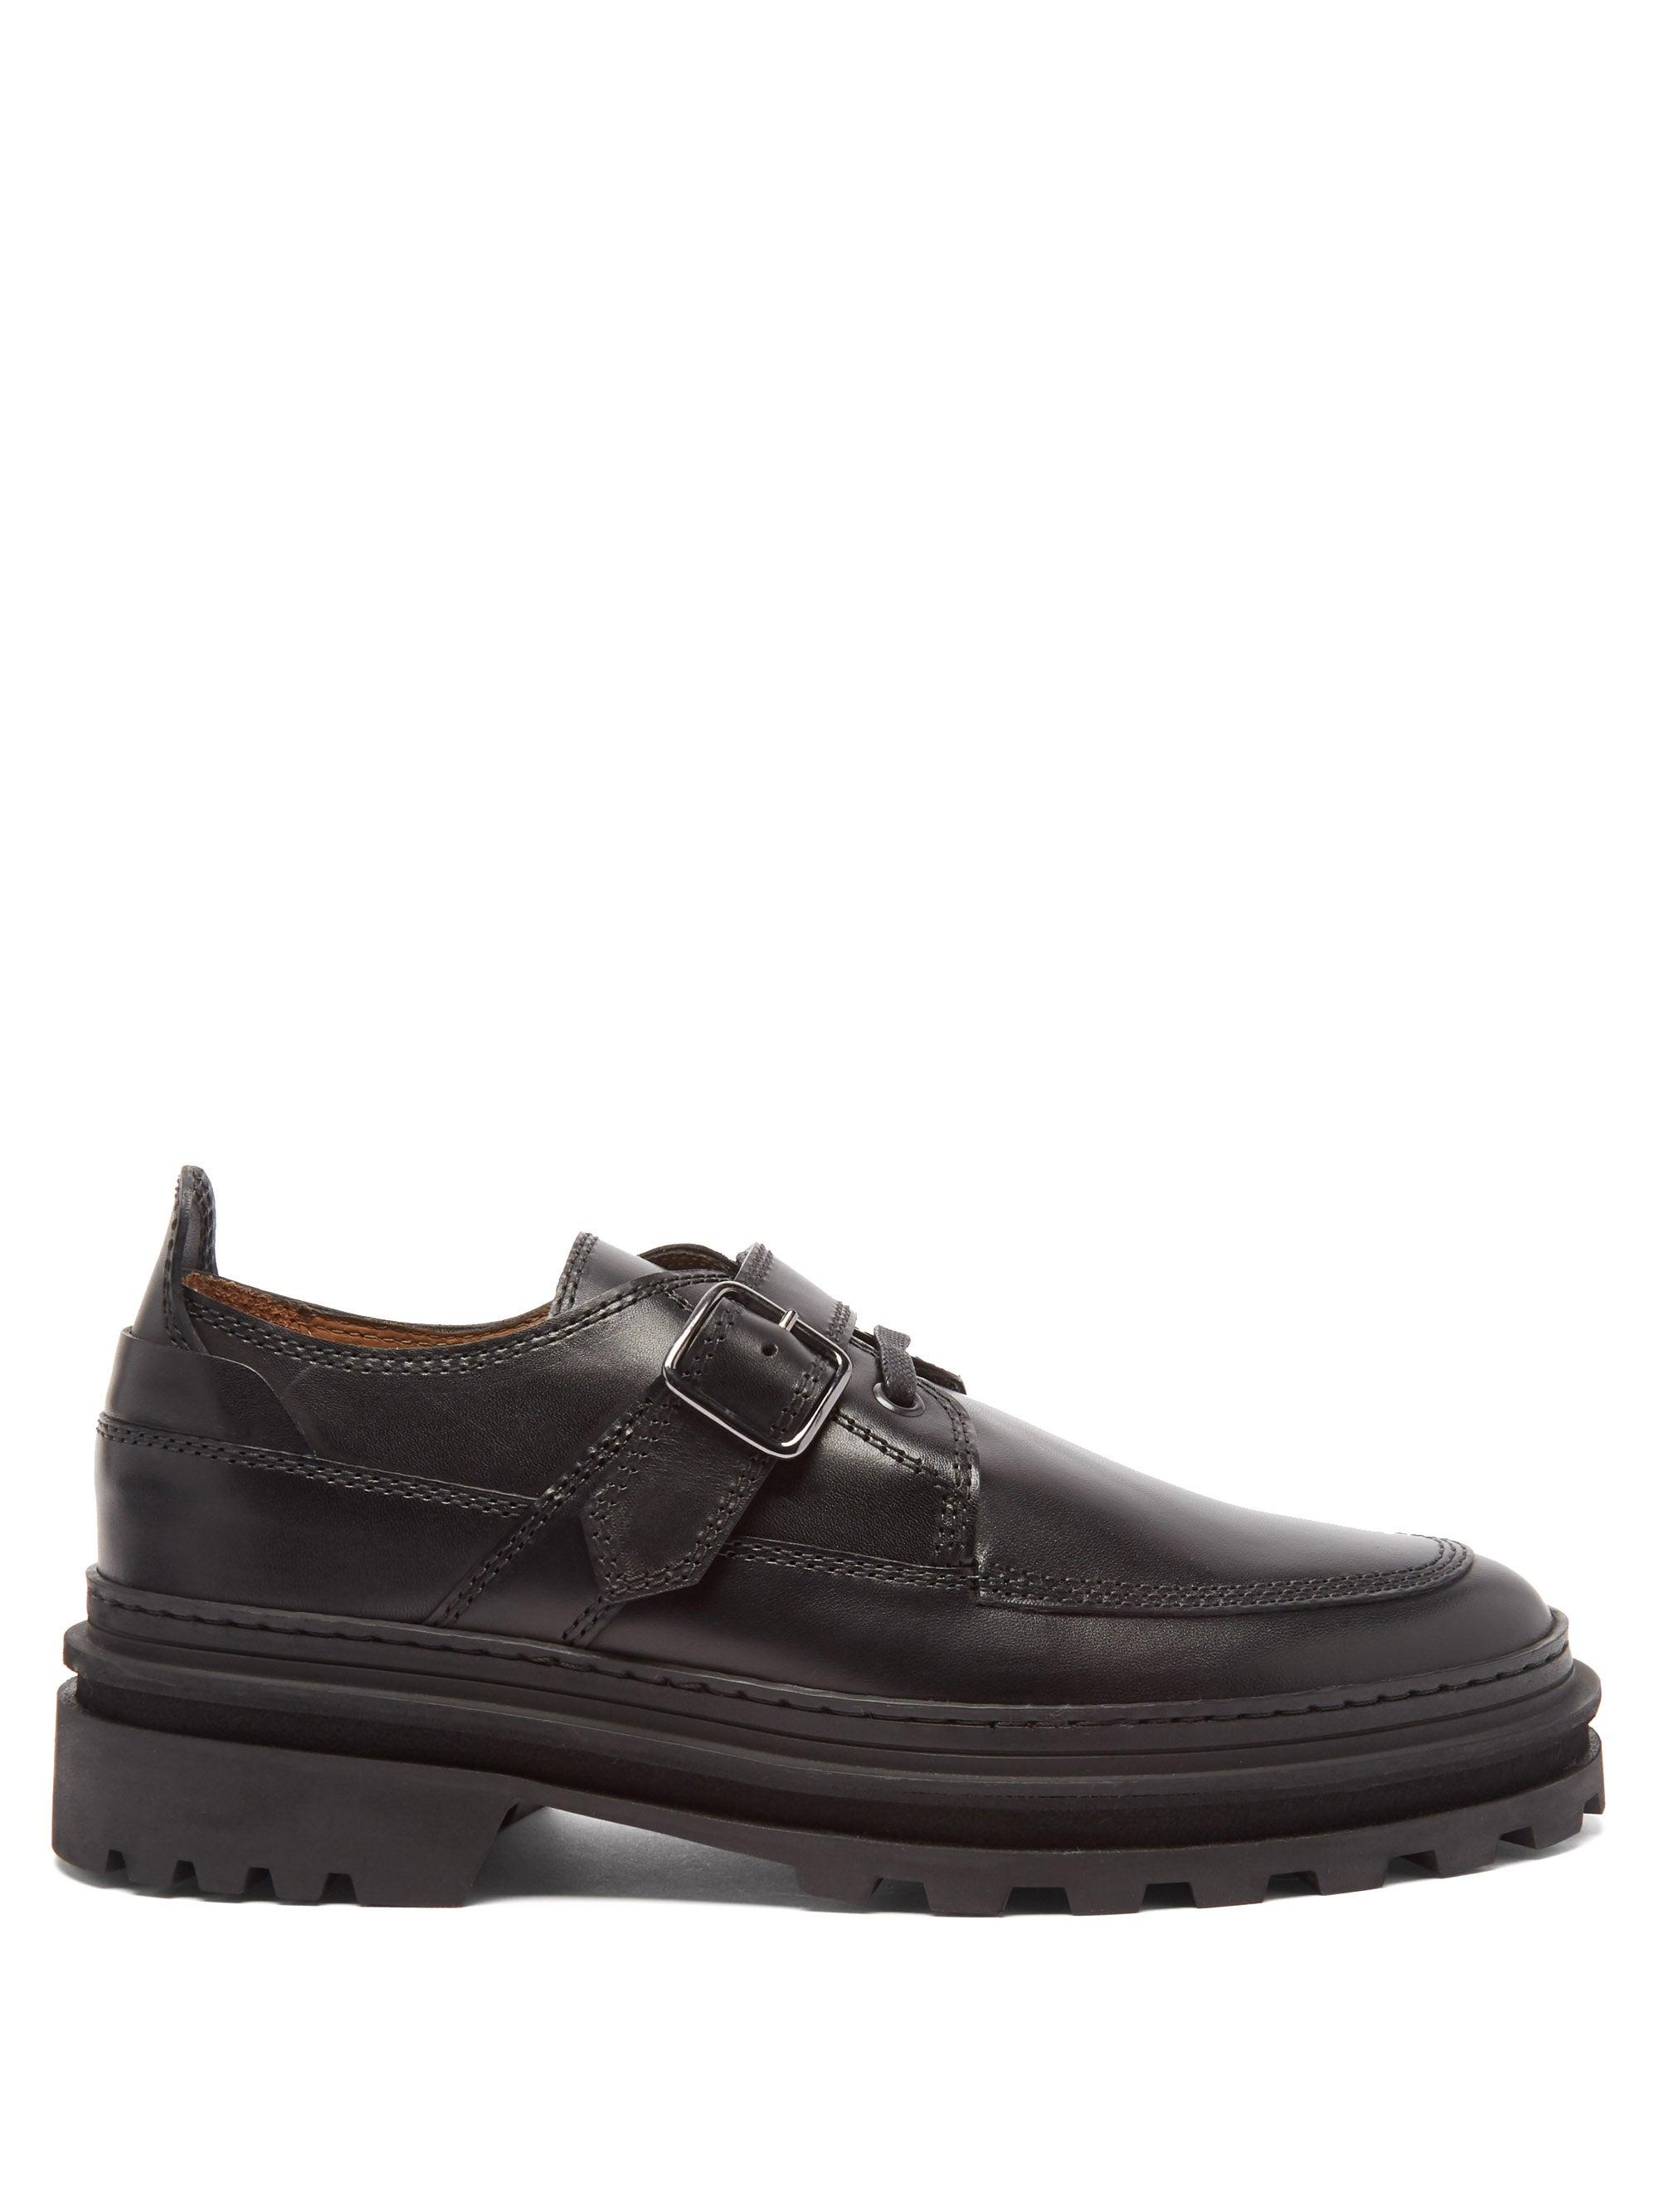 A.P.C. Alix Buckled Leather Derby Shoes in Black | Lyst